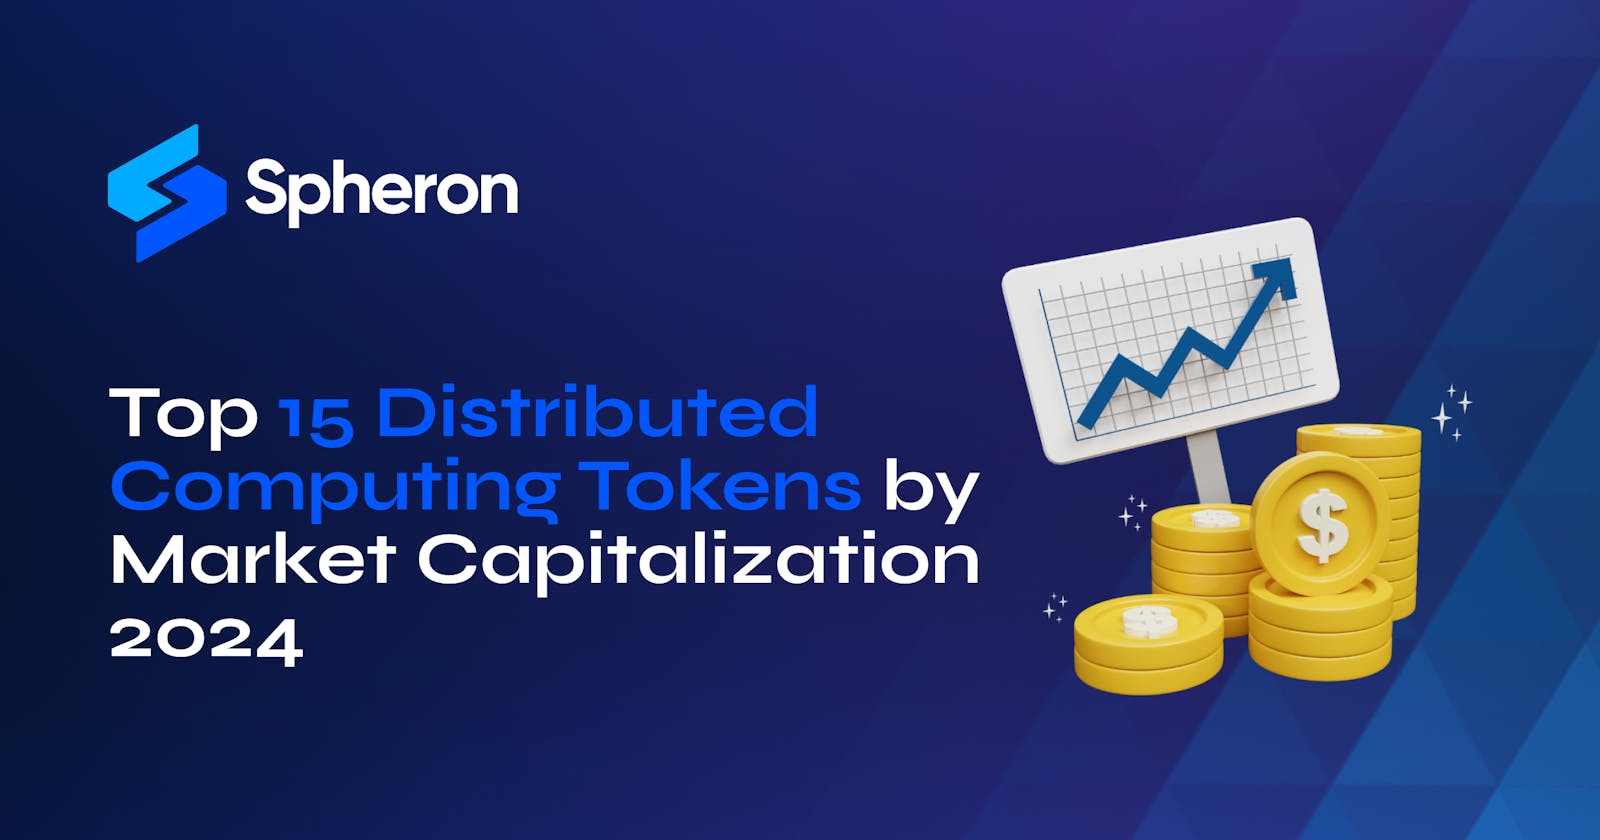 Top 15 Distributed Computing (DePIN) Tokens by Market Capitalization (2024)